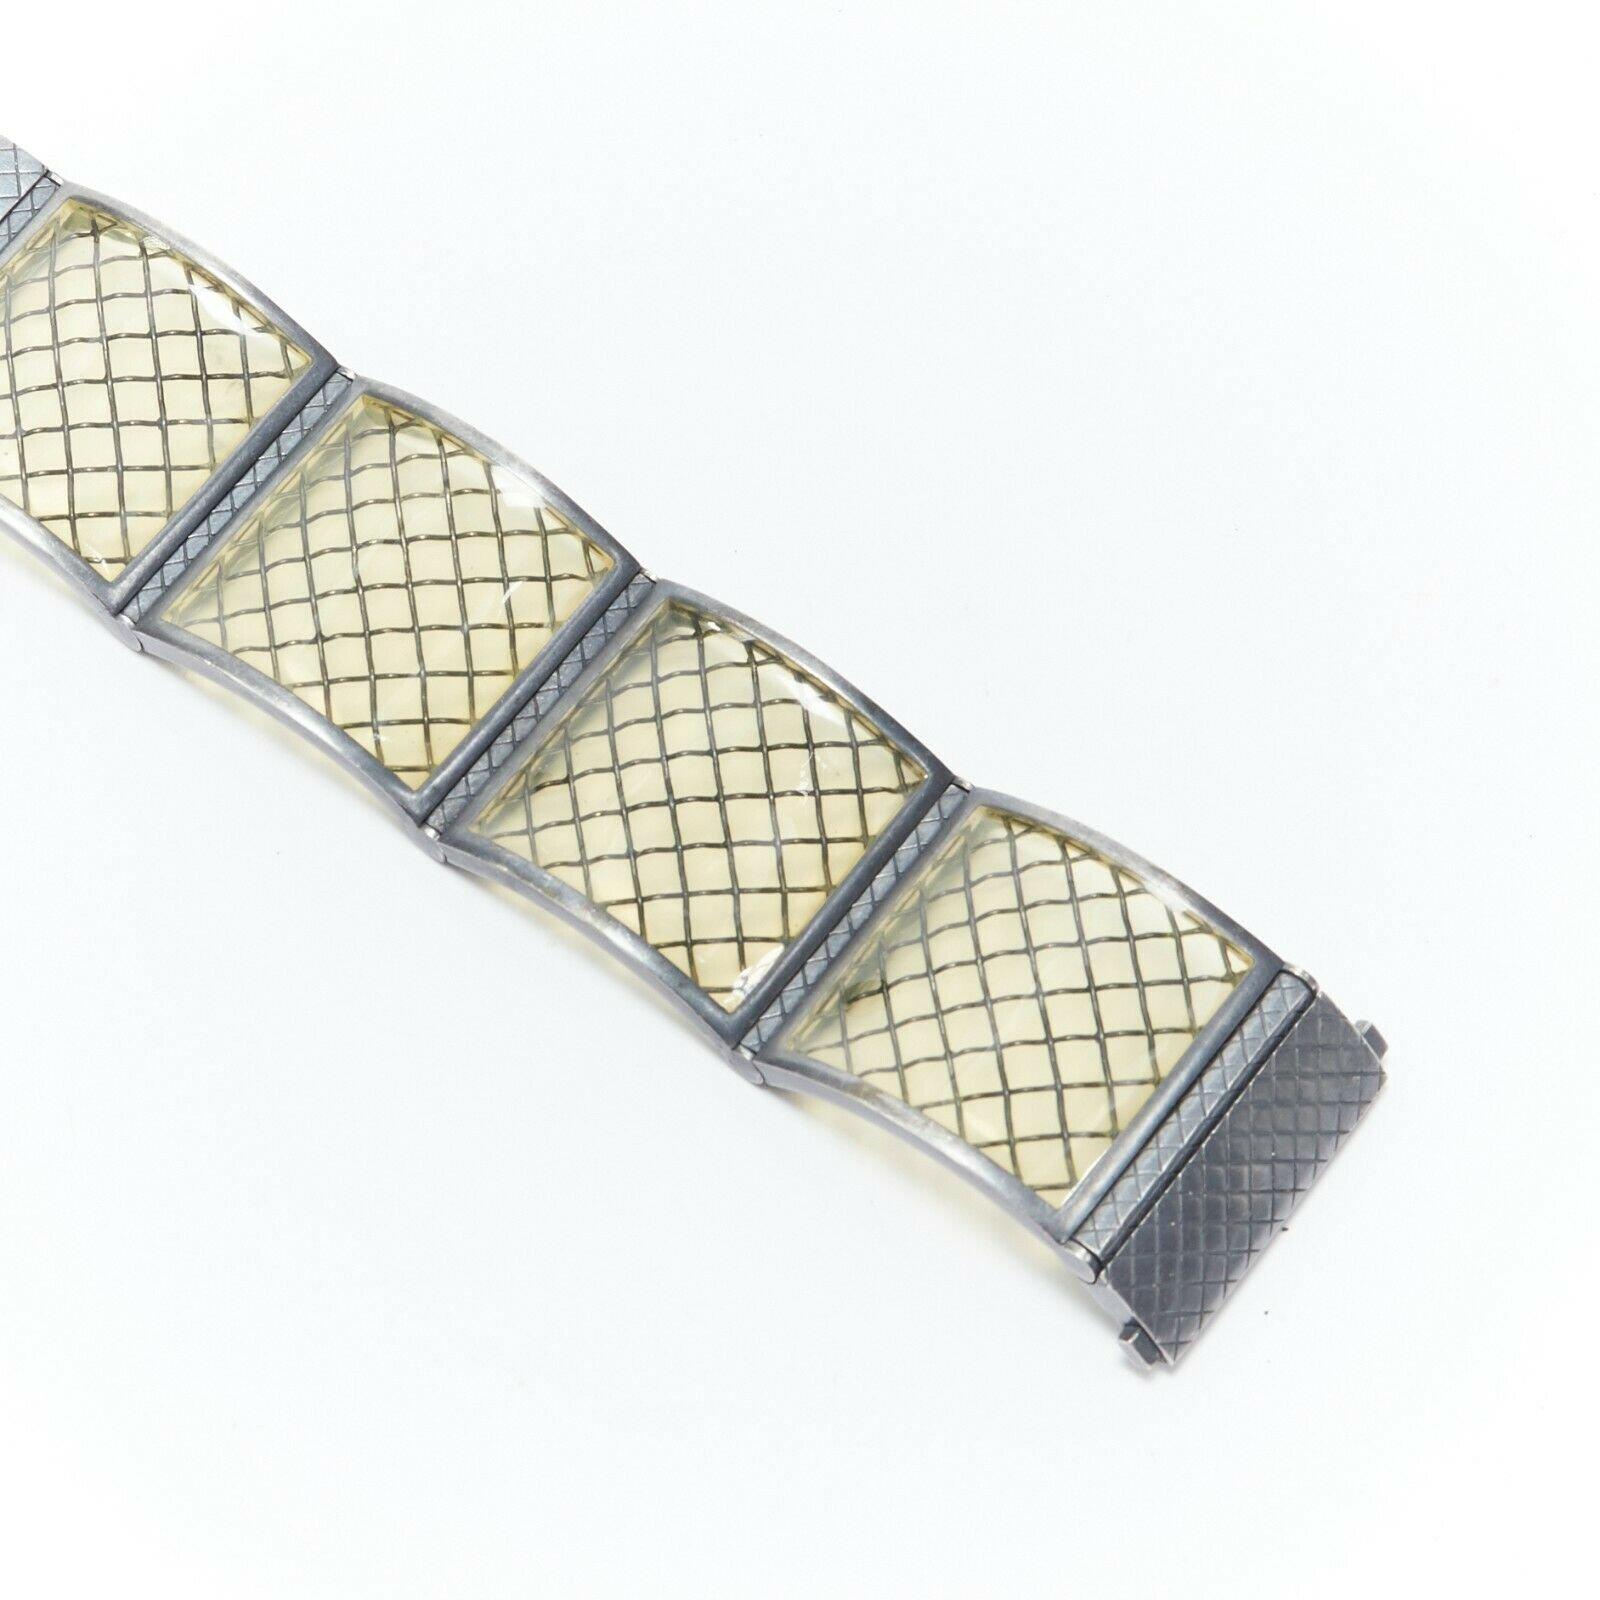 BOTTEGA VENETA sterling silver pale yellow intrecciato plexi cuff bracelet In Excellent Condition For Sale In Hong Kong, NT